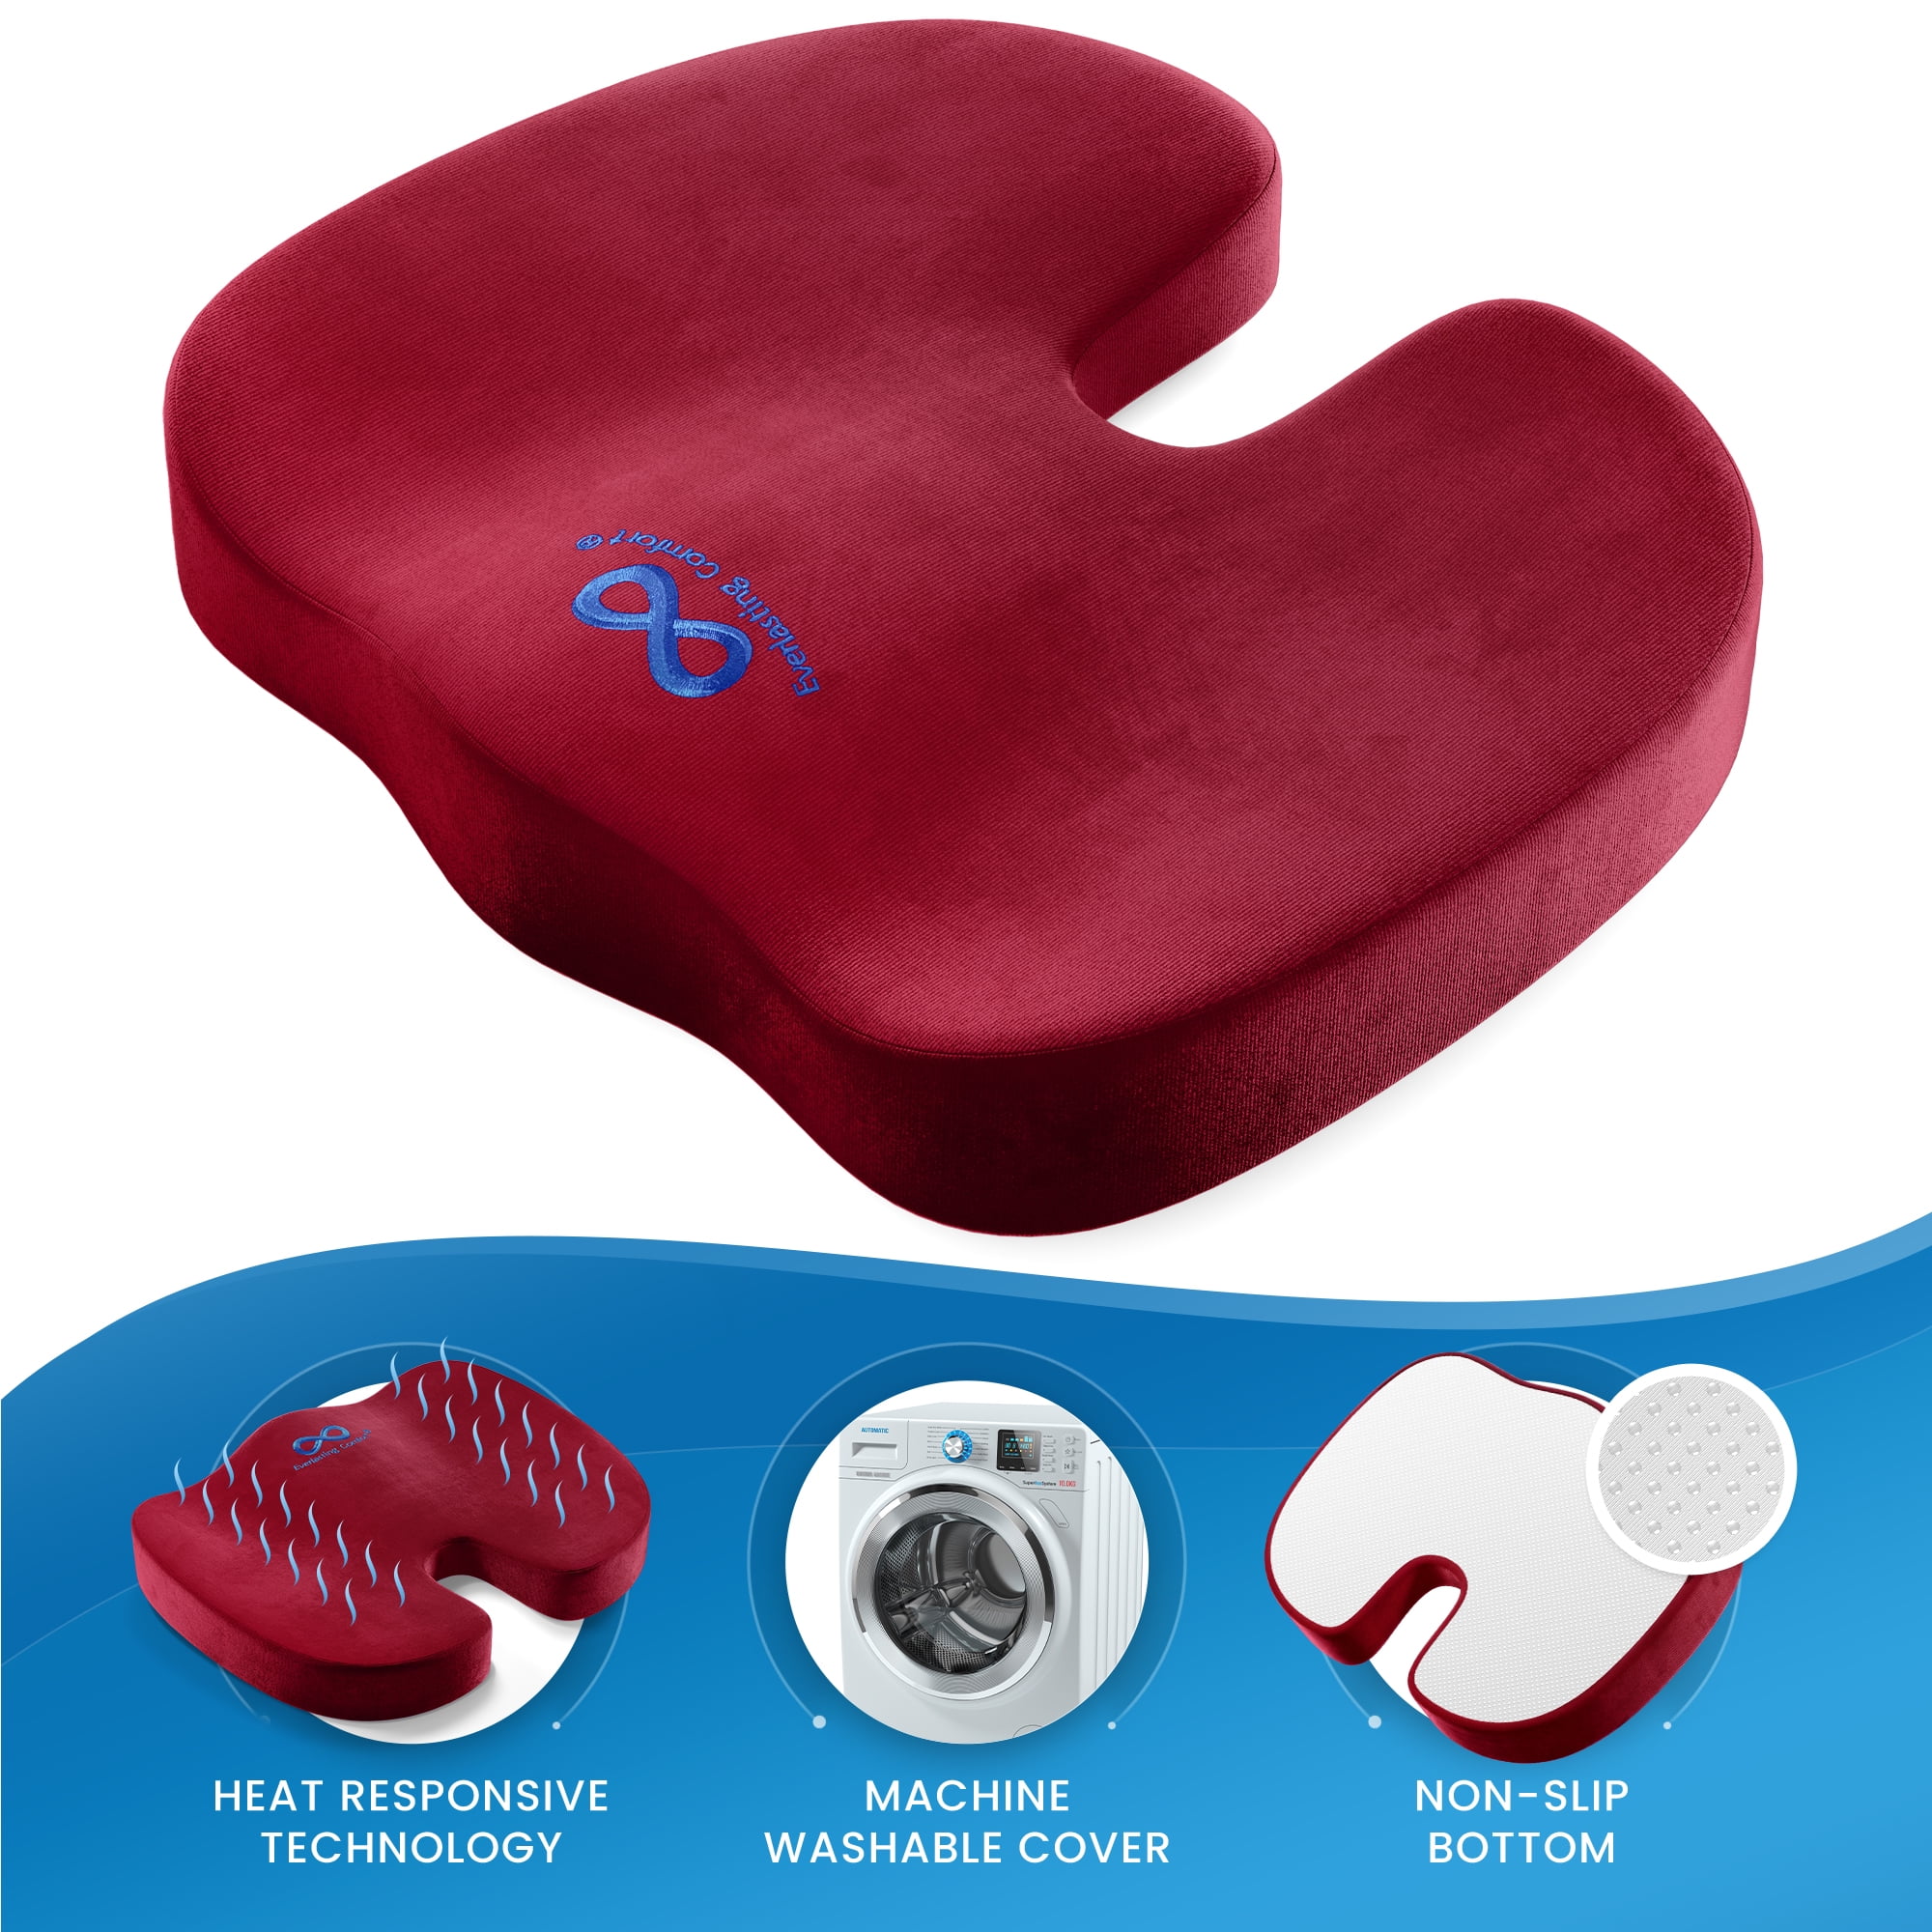 Everlasting Comfort Seat Cushion for Office, Pain Relief for Legs, Hips, and Back, Pure Memory Foam (Red), Size: 17 x 14 x 2